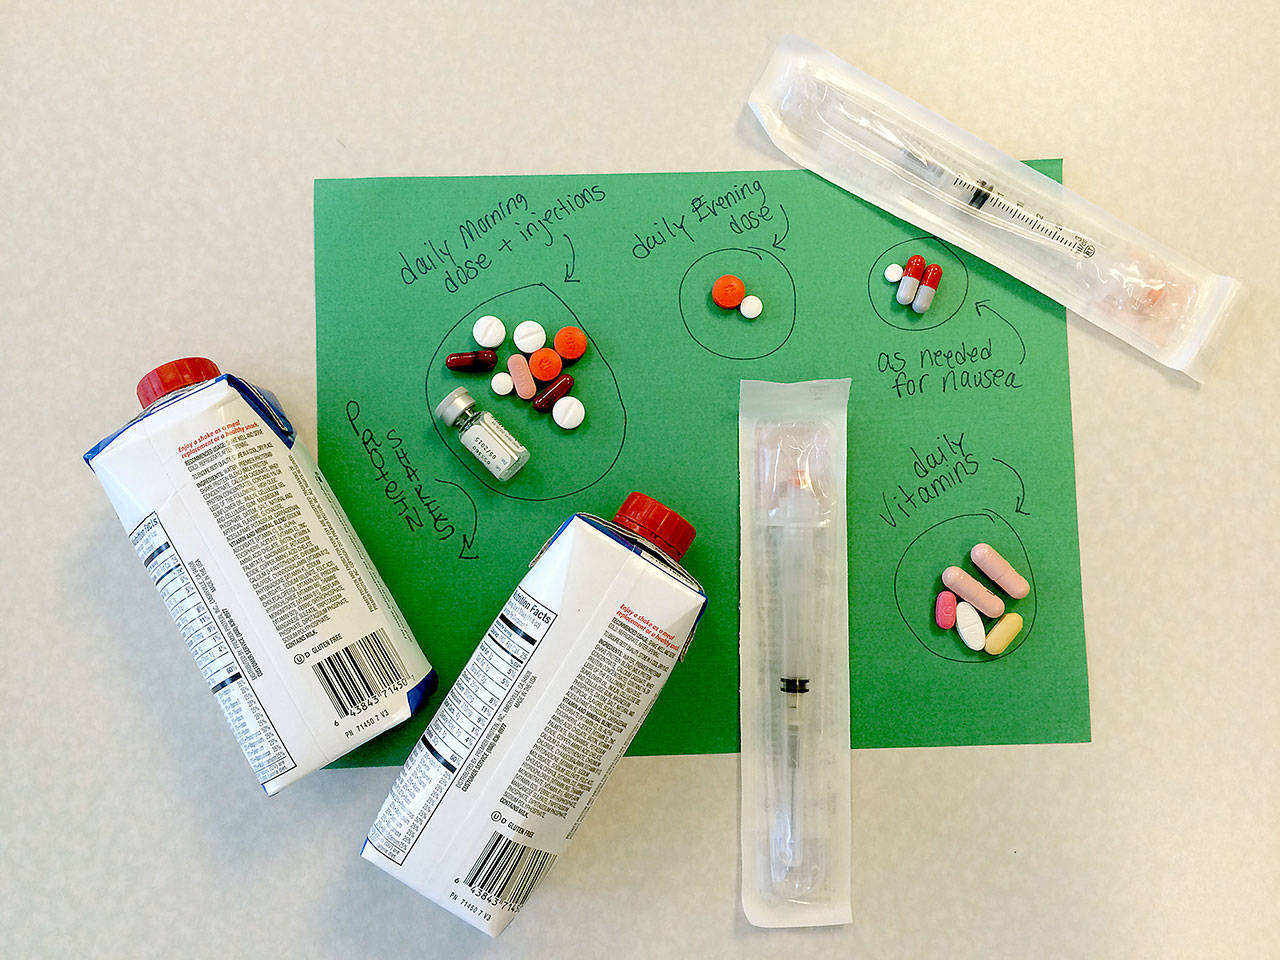 The daily medications needed to treat someone with tuberculosis: injections, pills, vitamins and nutritional drinks. (Snohomish Health District)